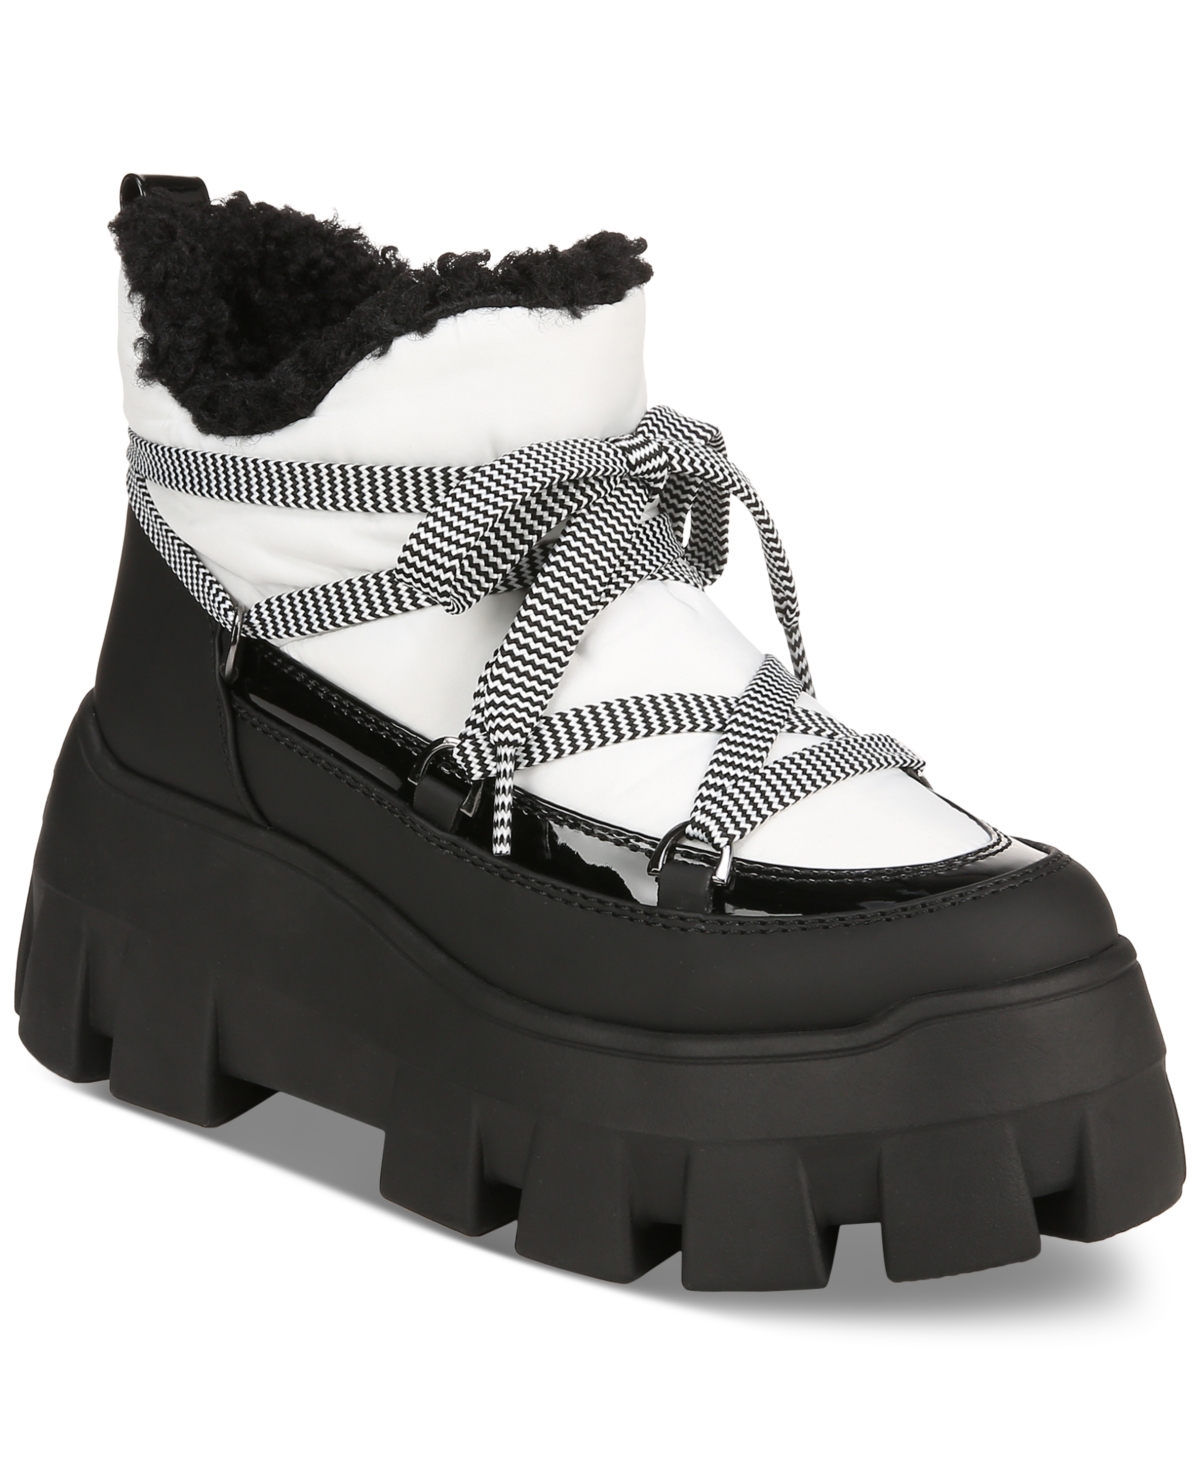 Circus Ny Women's Ali Lace-up Lug Platform Moon Boots In Bright White,black